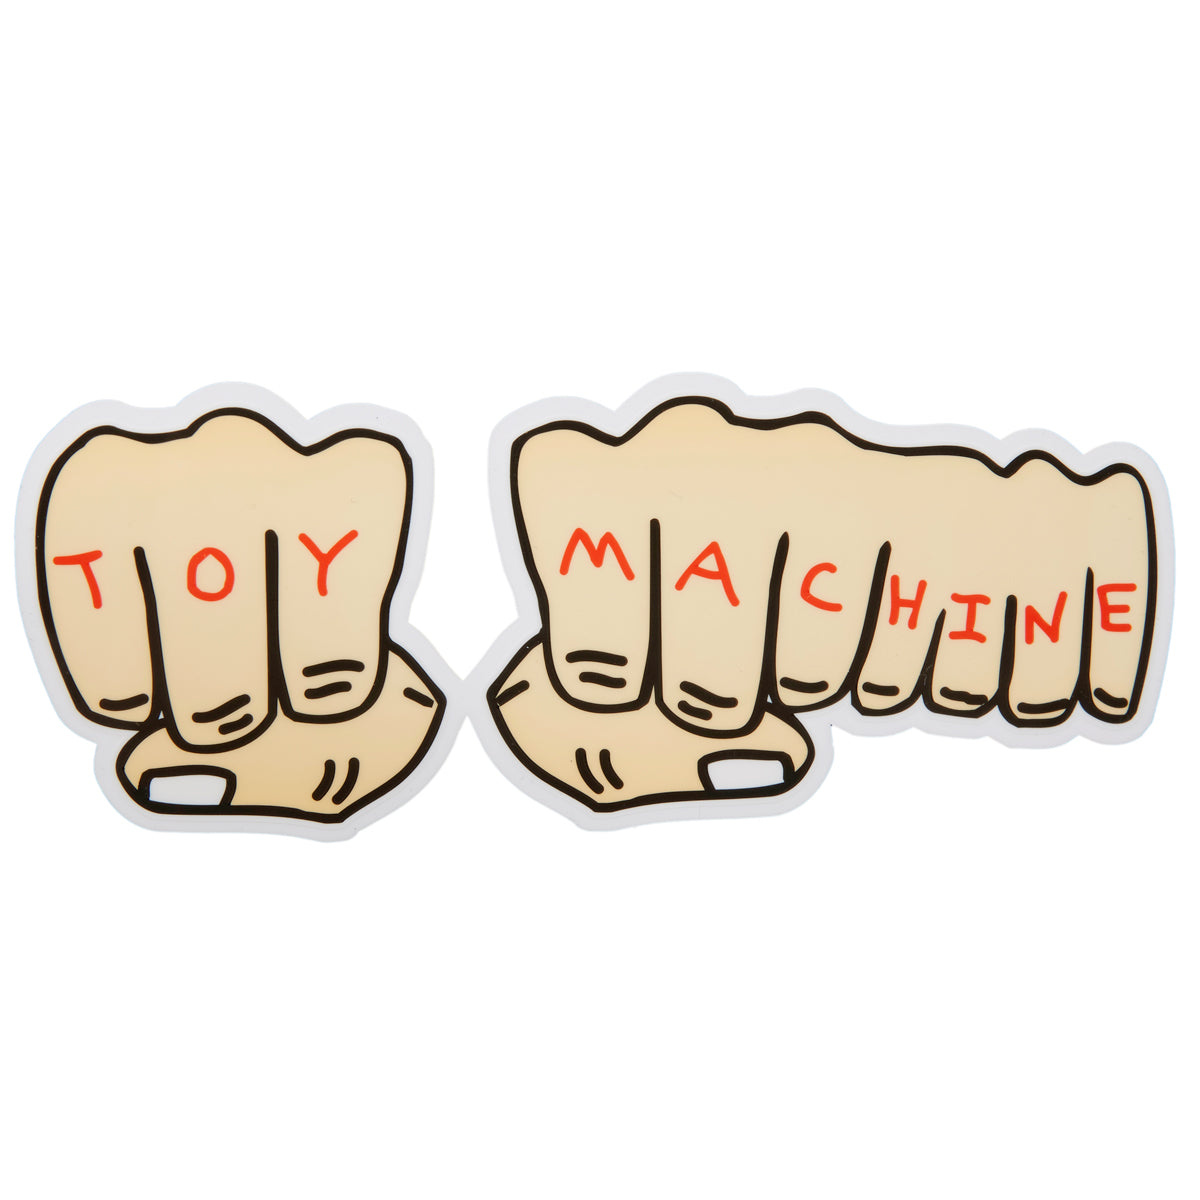 Toy Machine Fists Stickers image 1